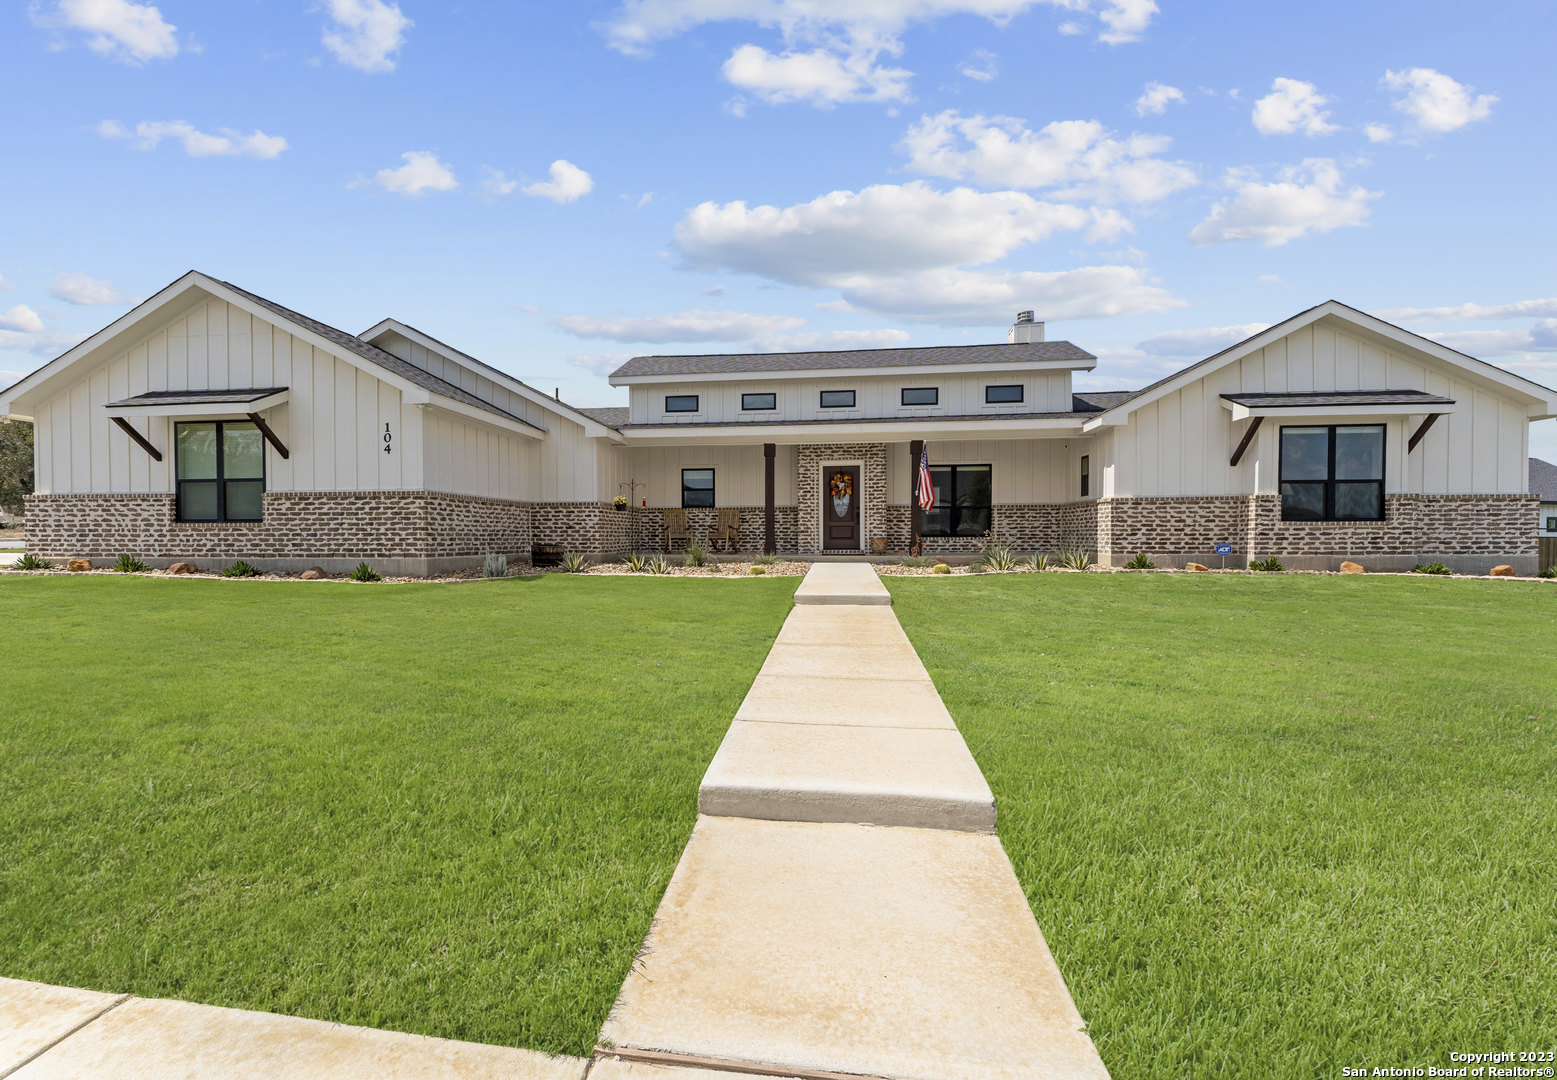 Photo of 104 Chinaberry Hl in La Vernia, TX